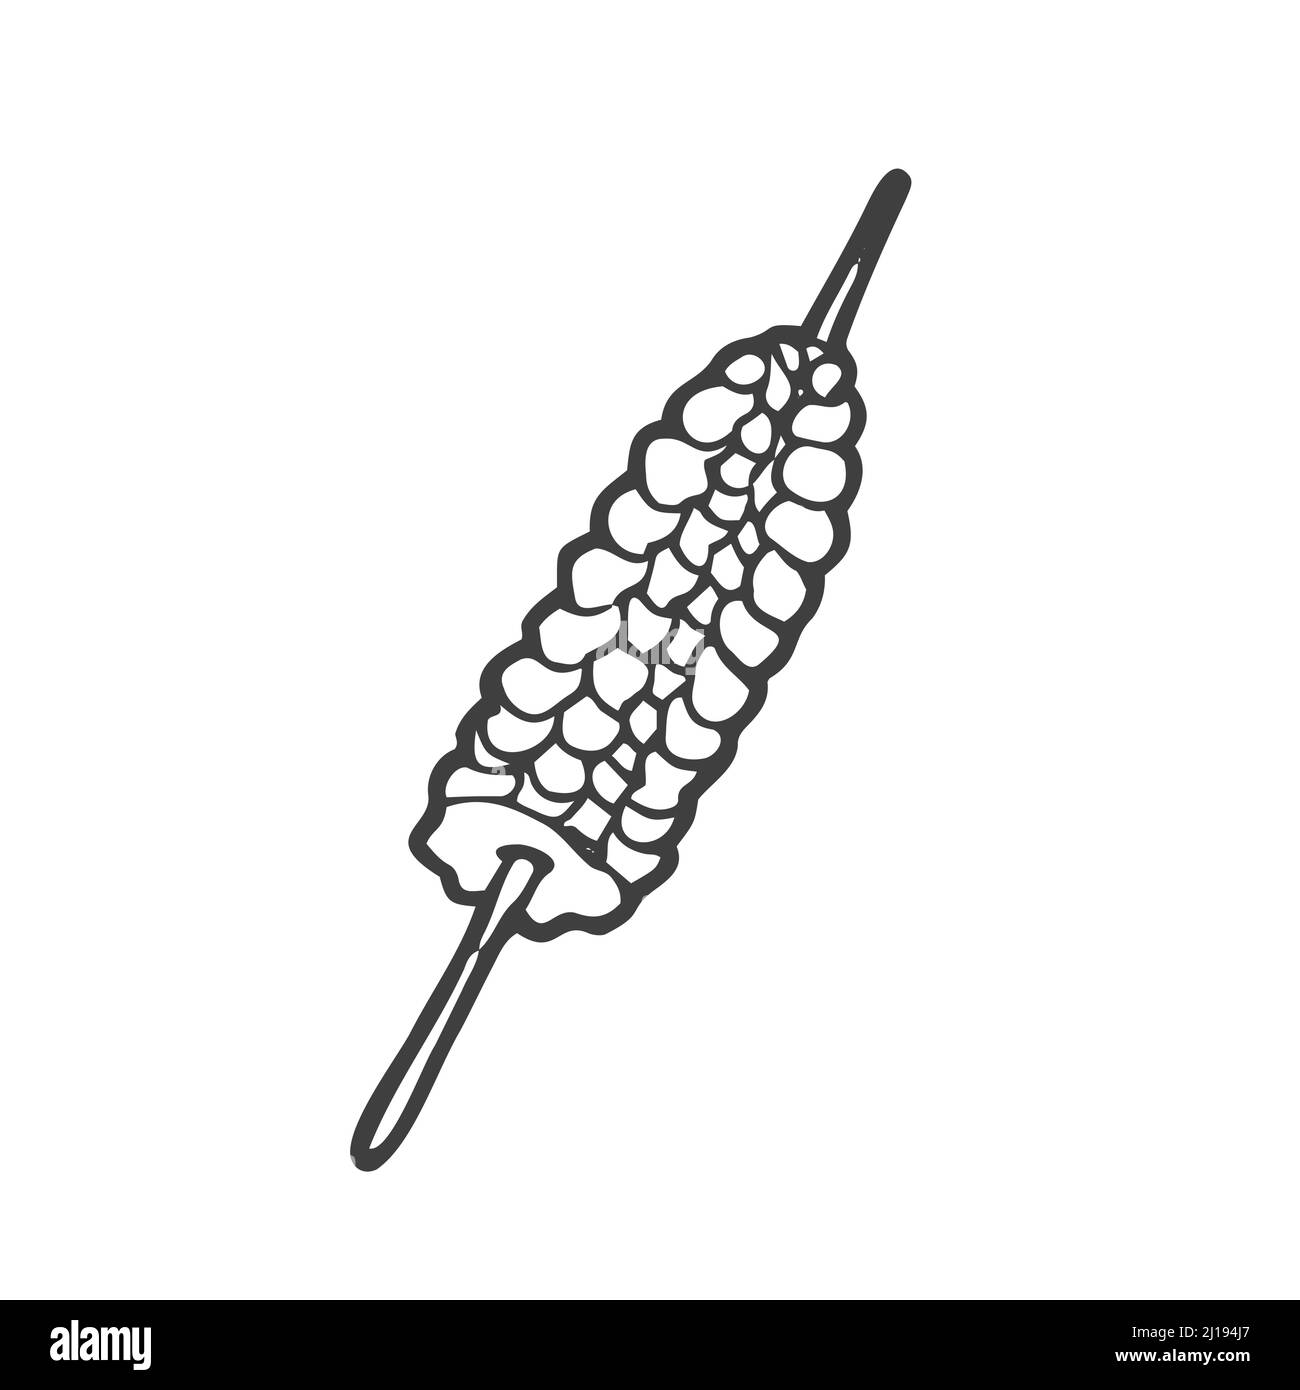 Doodle grilled sticks of corn. Mexican food. Sketchy hand-drawn vector illustration. Street food. Stock Vector